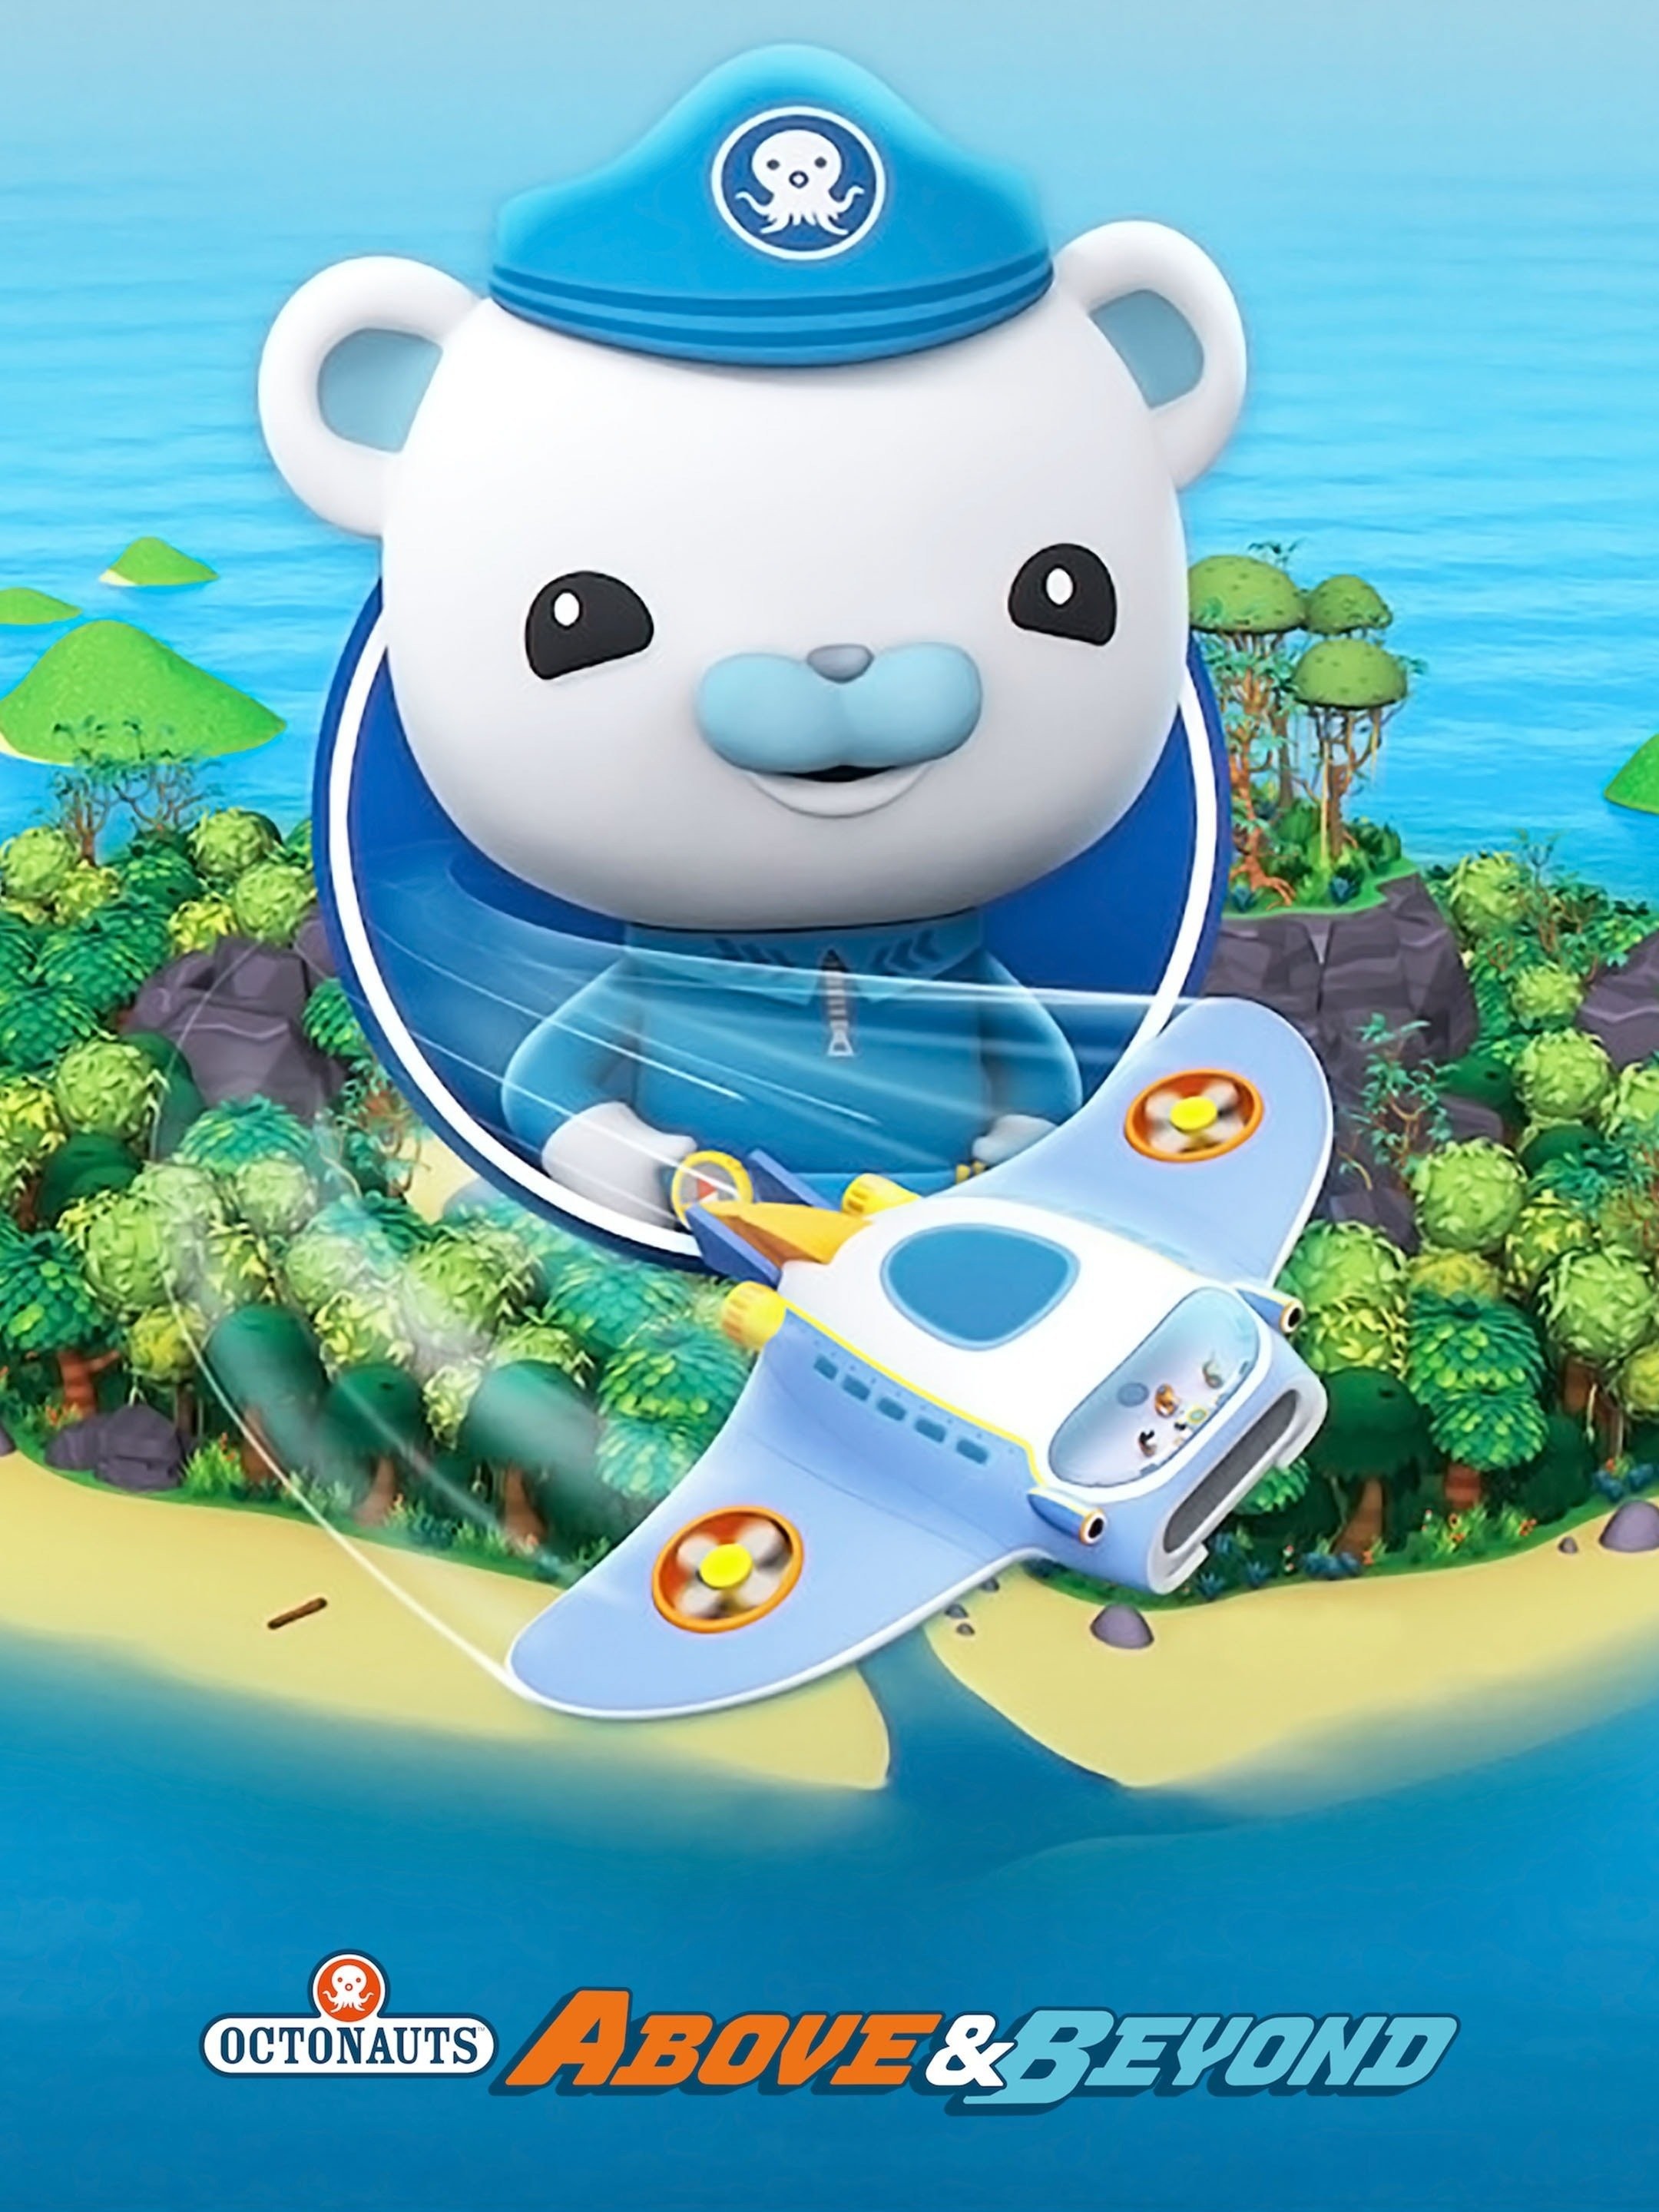 Octonauts: Above and Beyond Saves the Day With Science + Adventure.